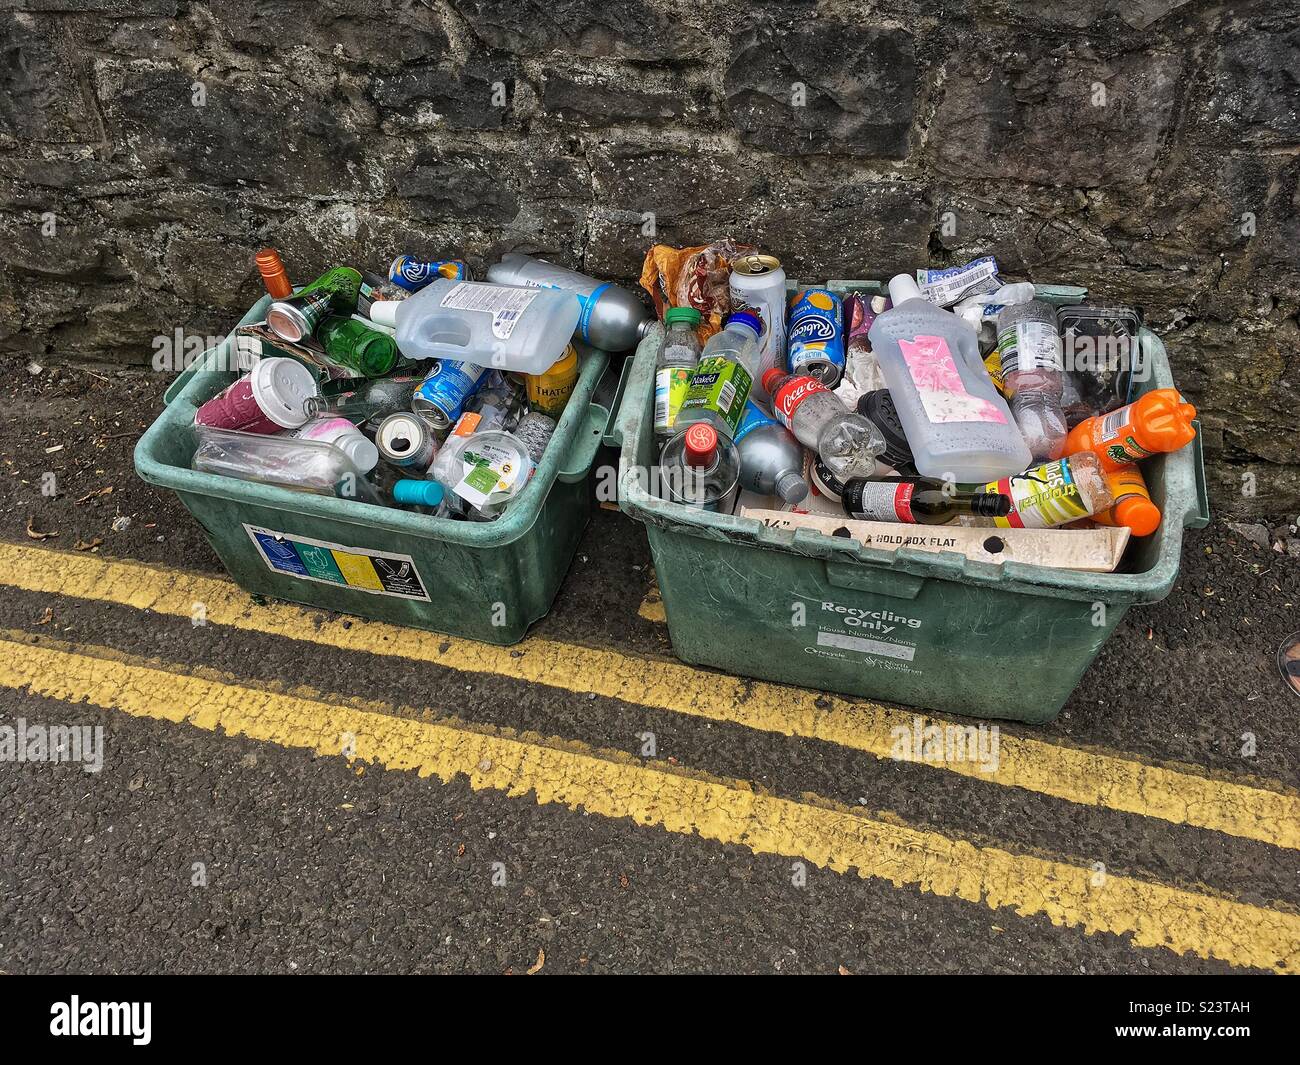 Recycling boxes awaiting collection by the roadside in Weston-super-Mare, UK Stock Photo